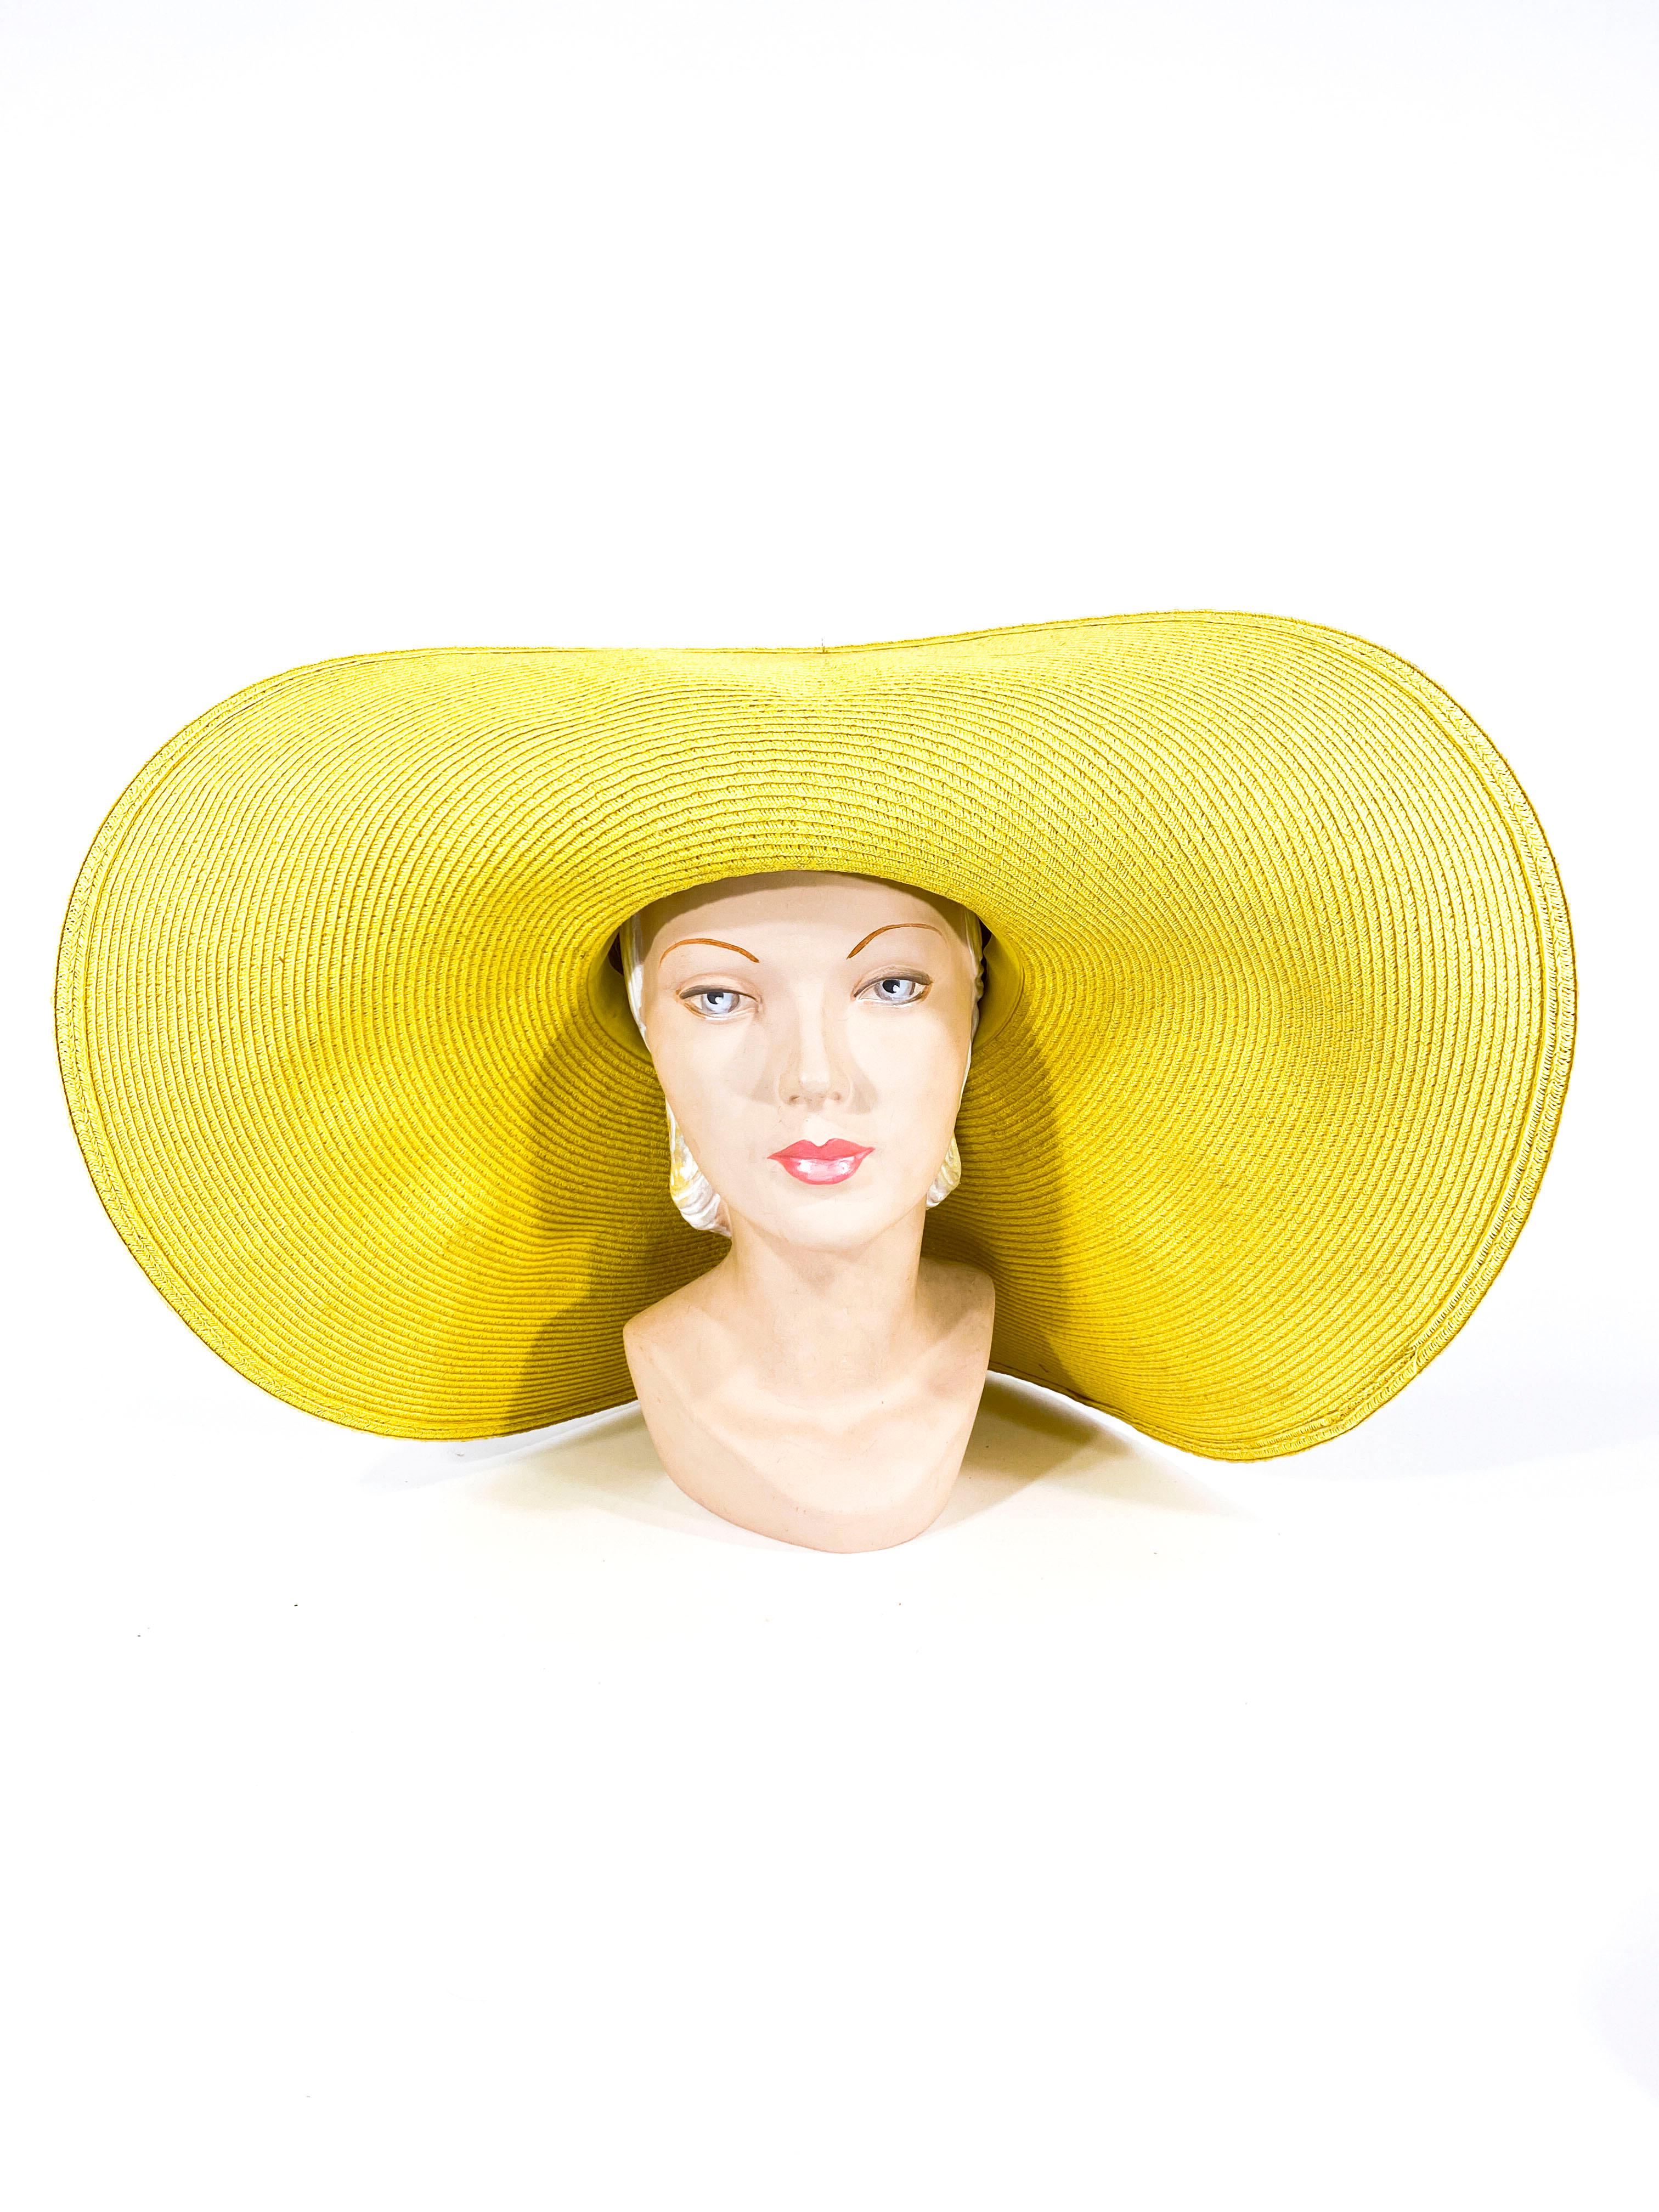 1980s yellow straw sunhat with an oversized unstructured brim and a custom made silk jersey printed hat band from original Leonard fabric. 